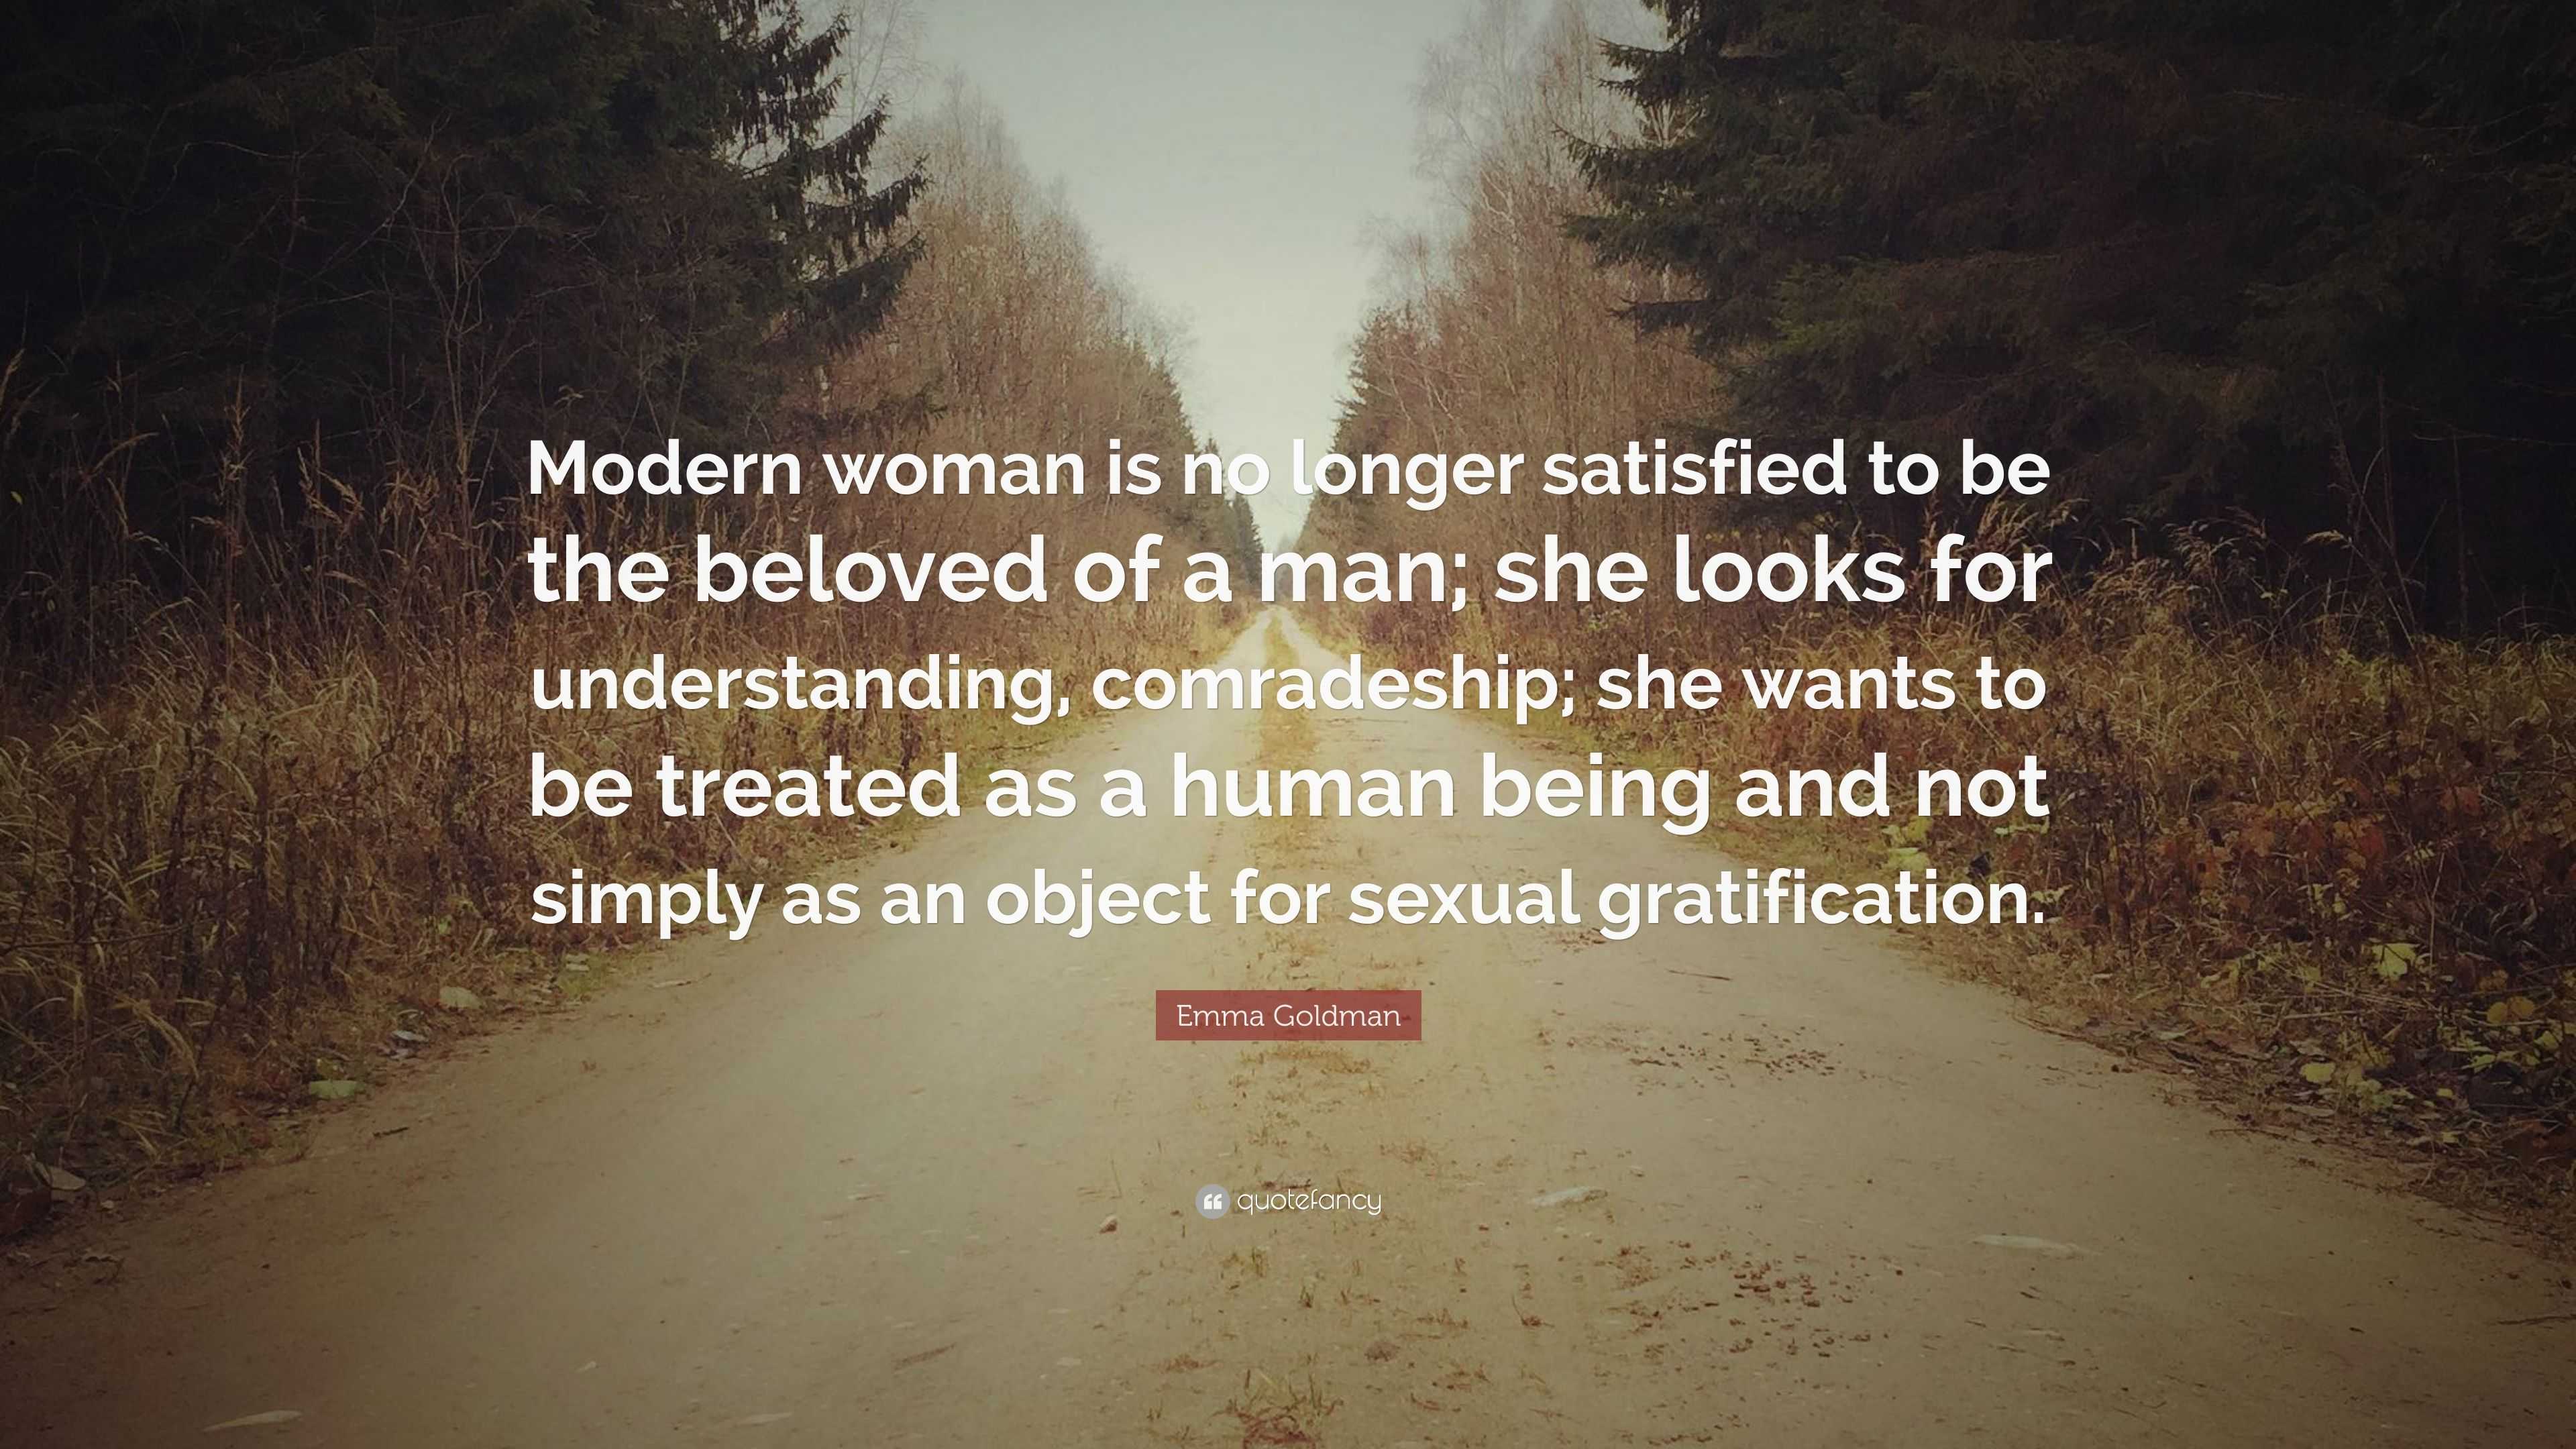 What It Means to Be a Modern Woman